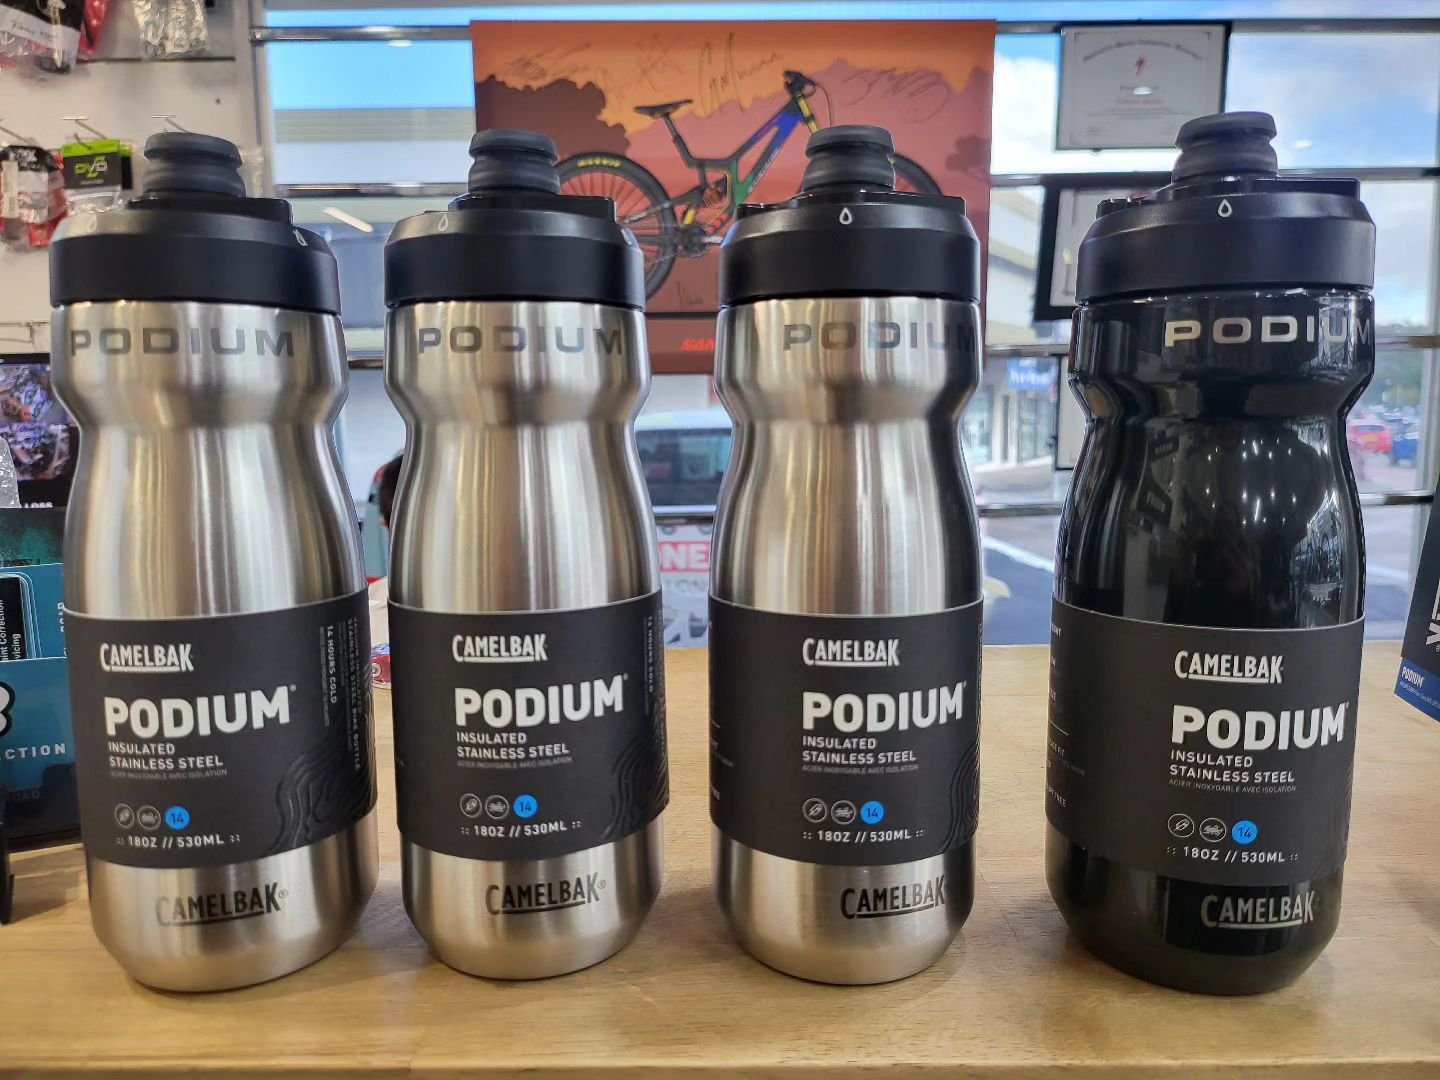 New in Store CAMELBAK 🔥
PODIUM INSULATED STEEL BOTTLE
Tough enough to tackle any ride, our Podium&reg; Steel is built for life on and off the road. Made from premium 18/8 stainless steel, this sleek bottle combines rugged durability with a streamlin